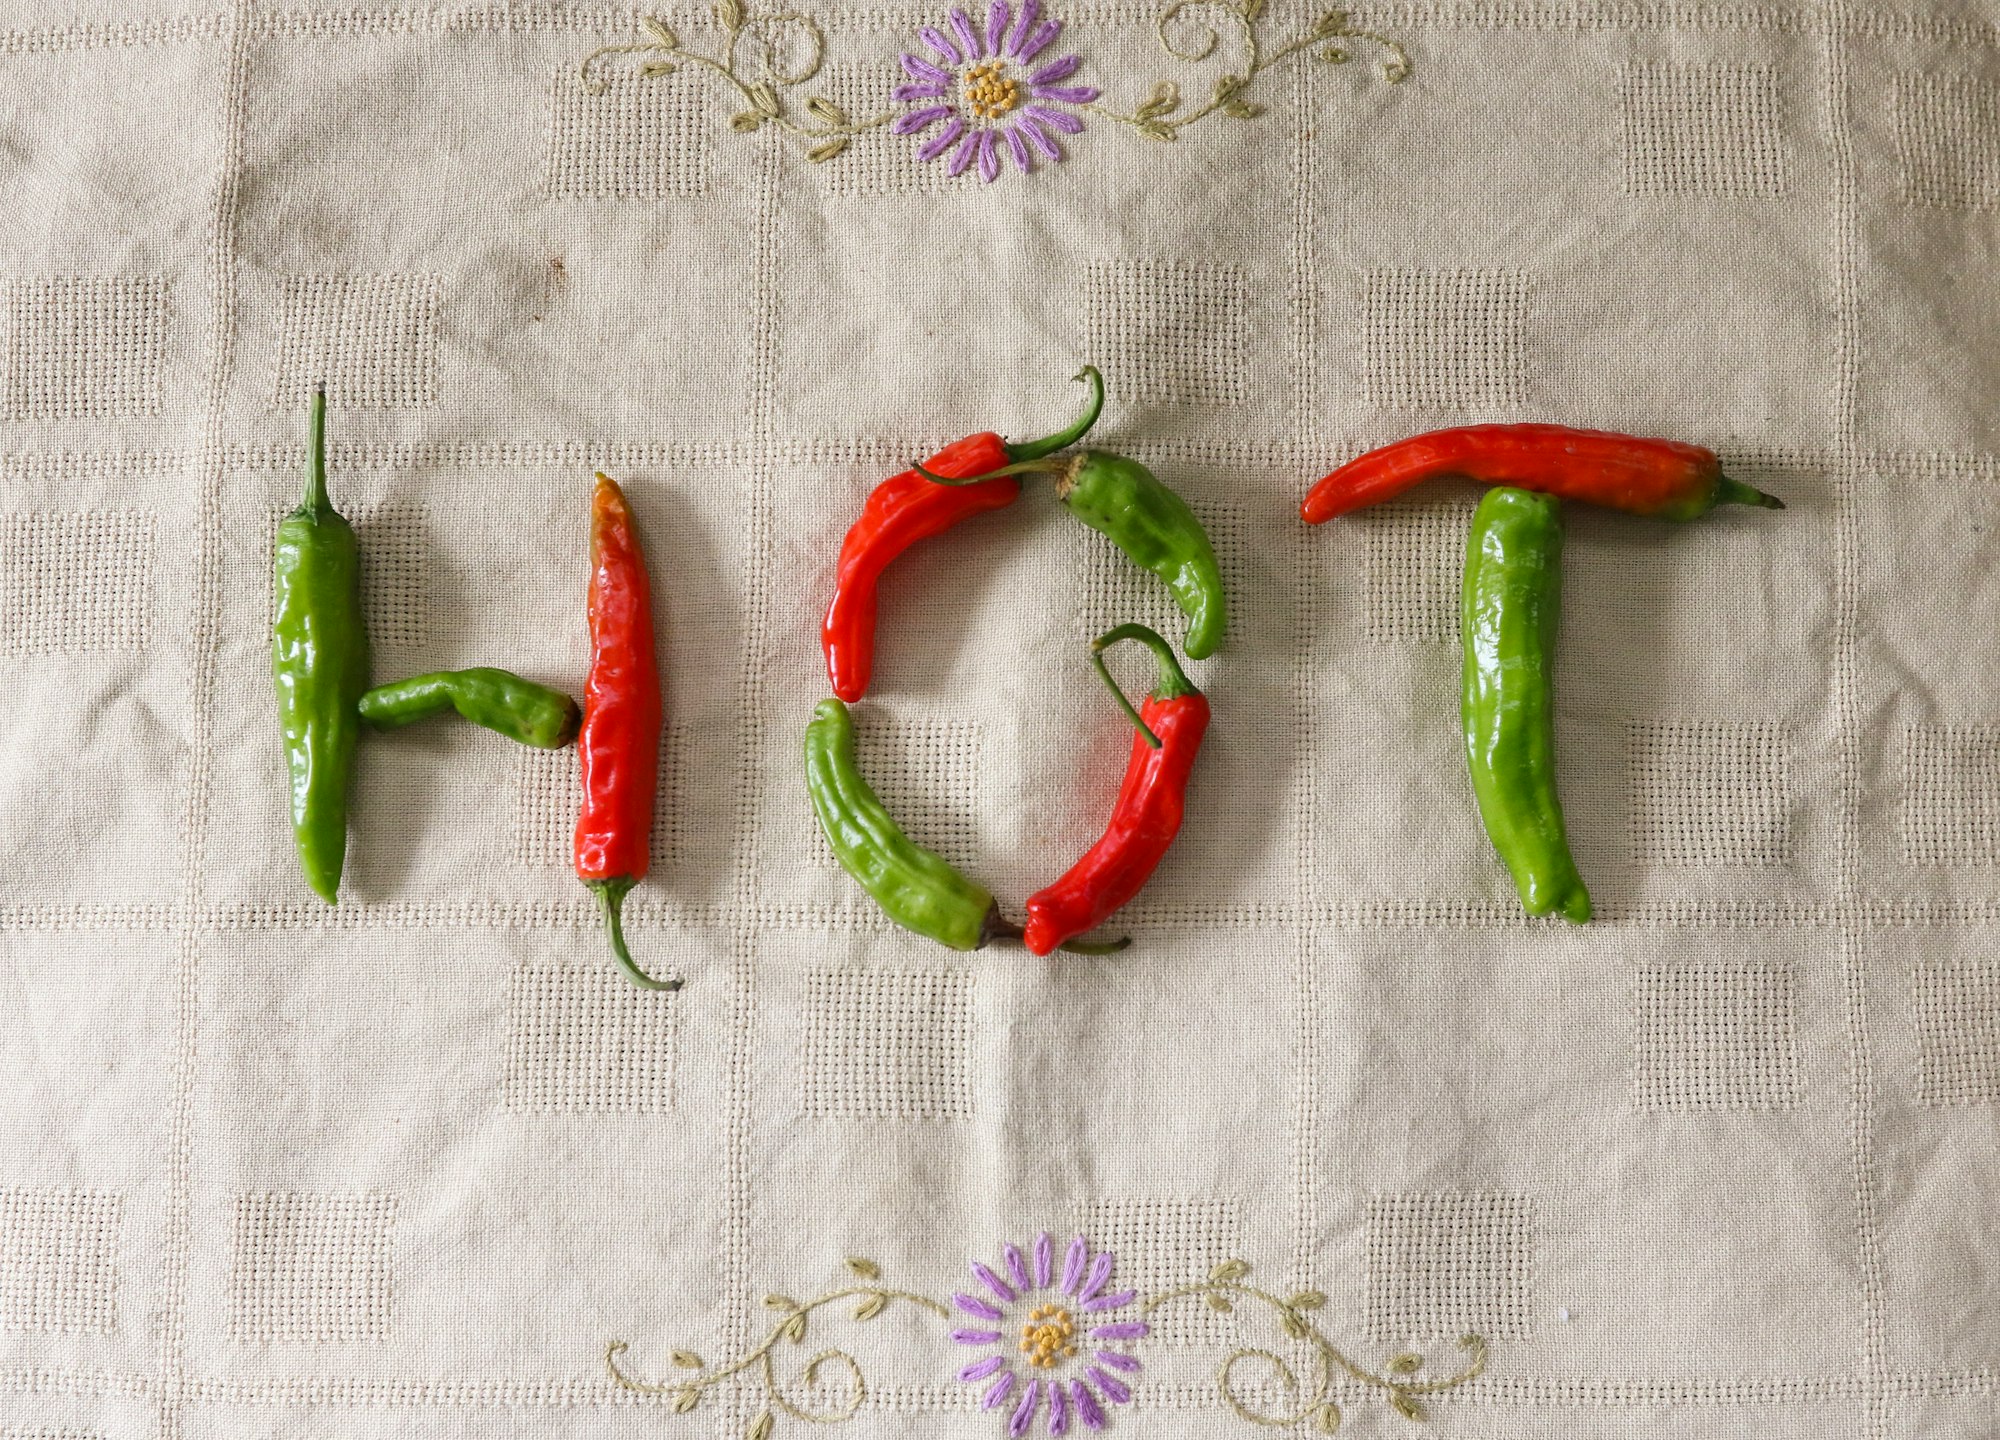 We were given an entire box of peppers. We couldn't possibly eat an entire box, so we had to give away a bunch before they spoiled. And I took photos too of meaningful food related words.